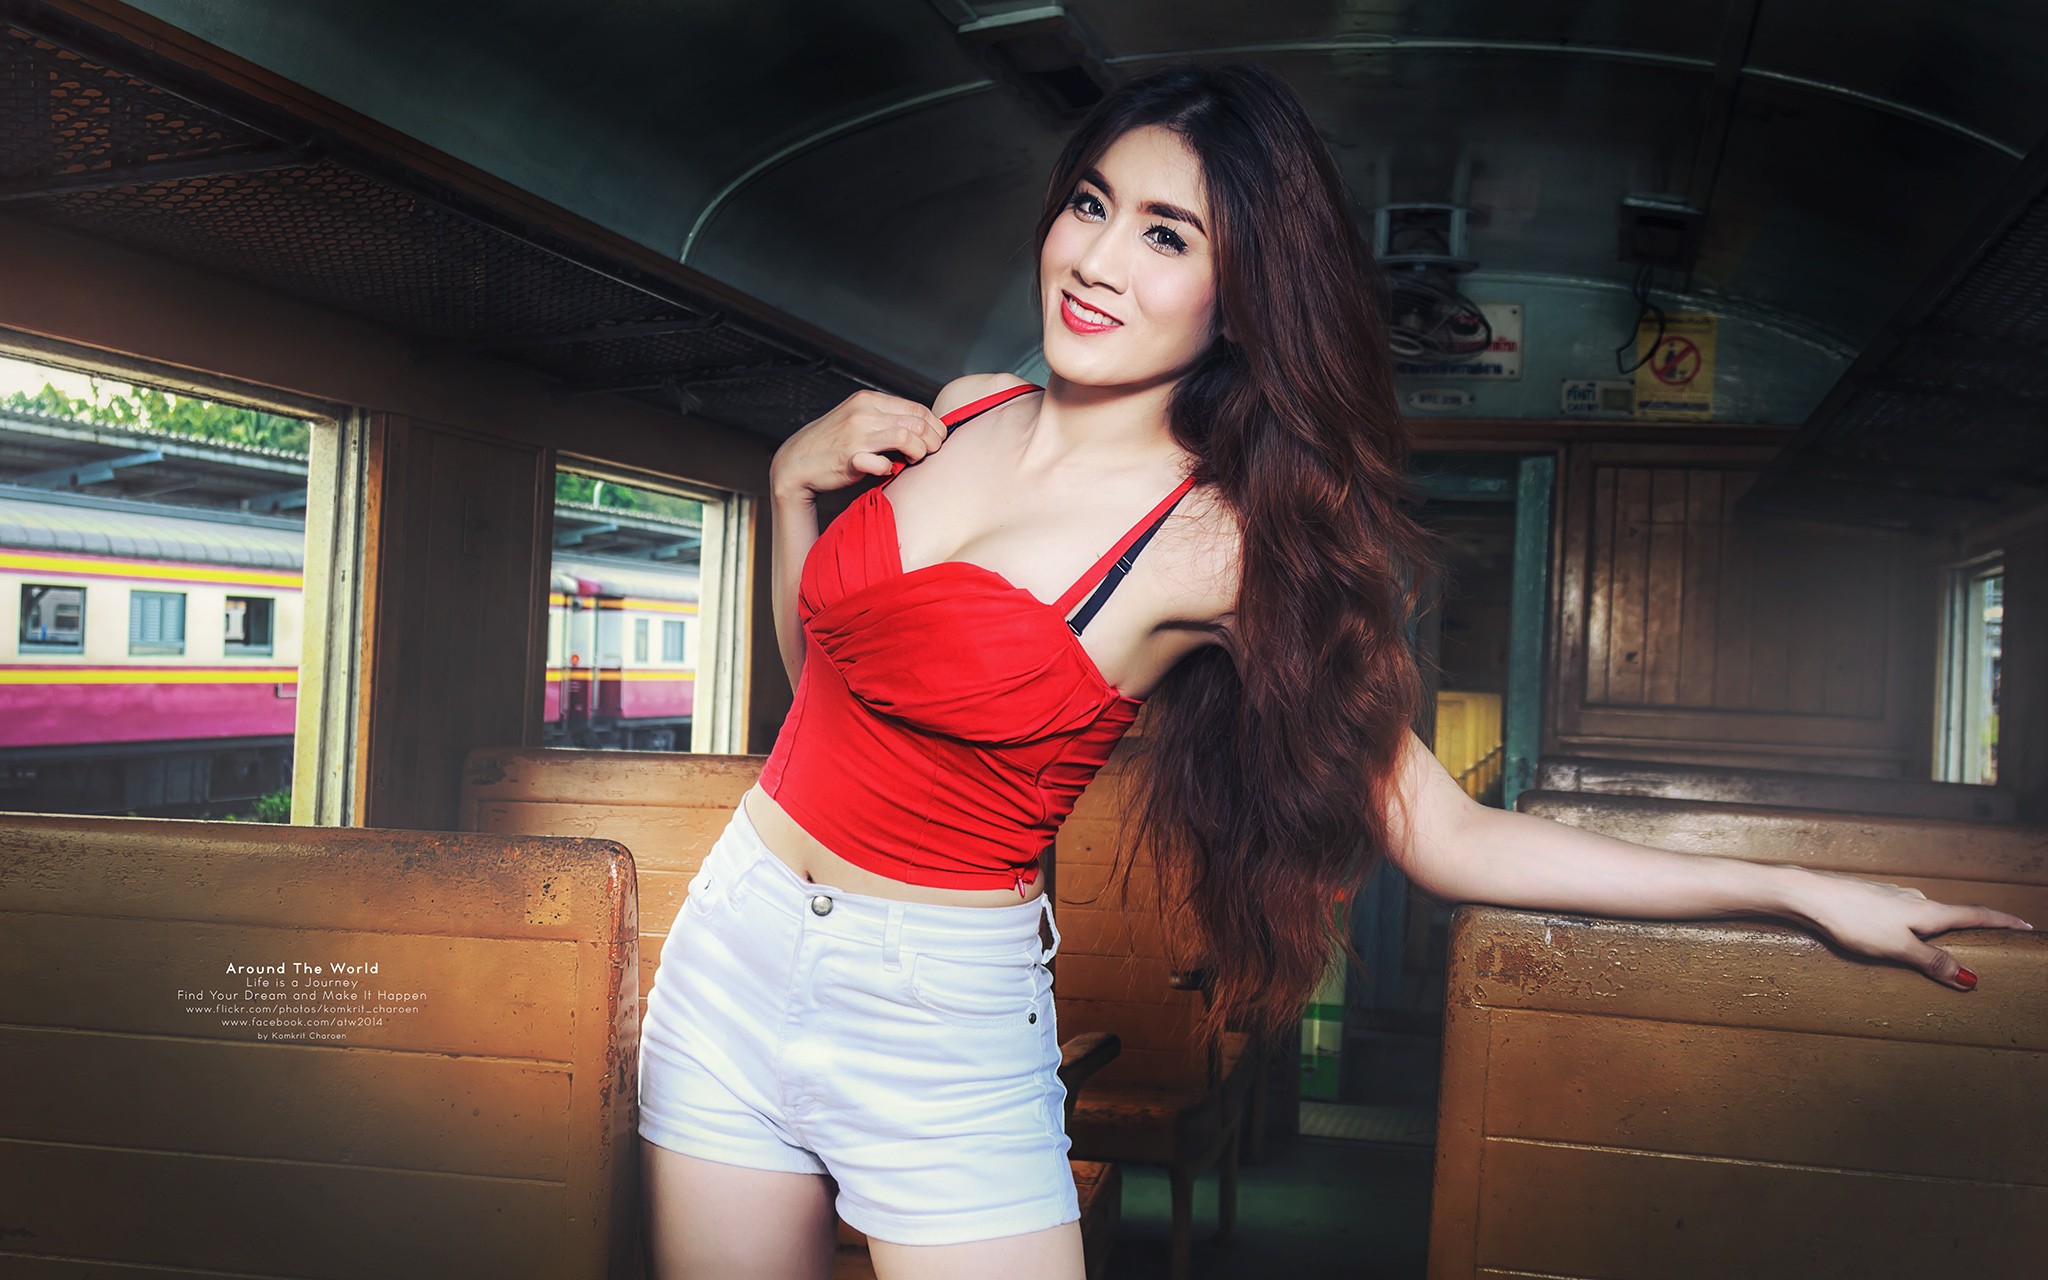 People 2048x1280 train women Asian redhead camisole jean shorts vehicle red tops red nails red lipstick dyed hair makeup model standing